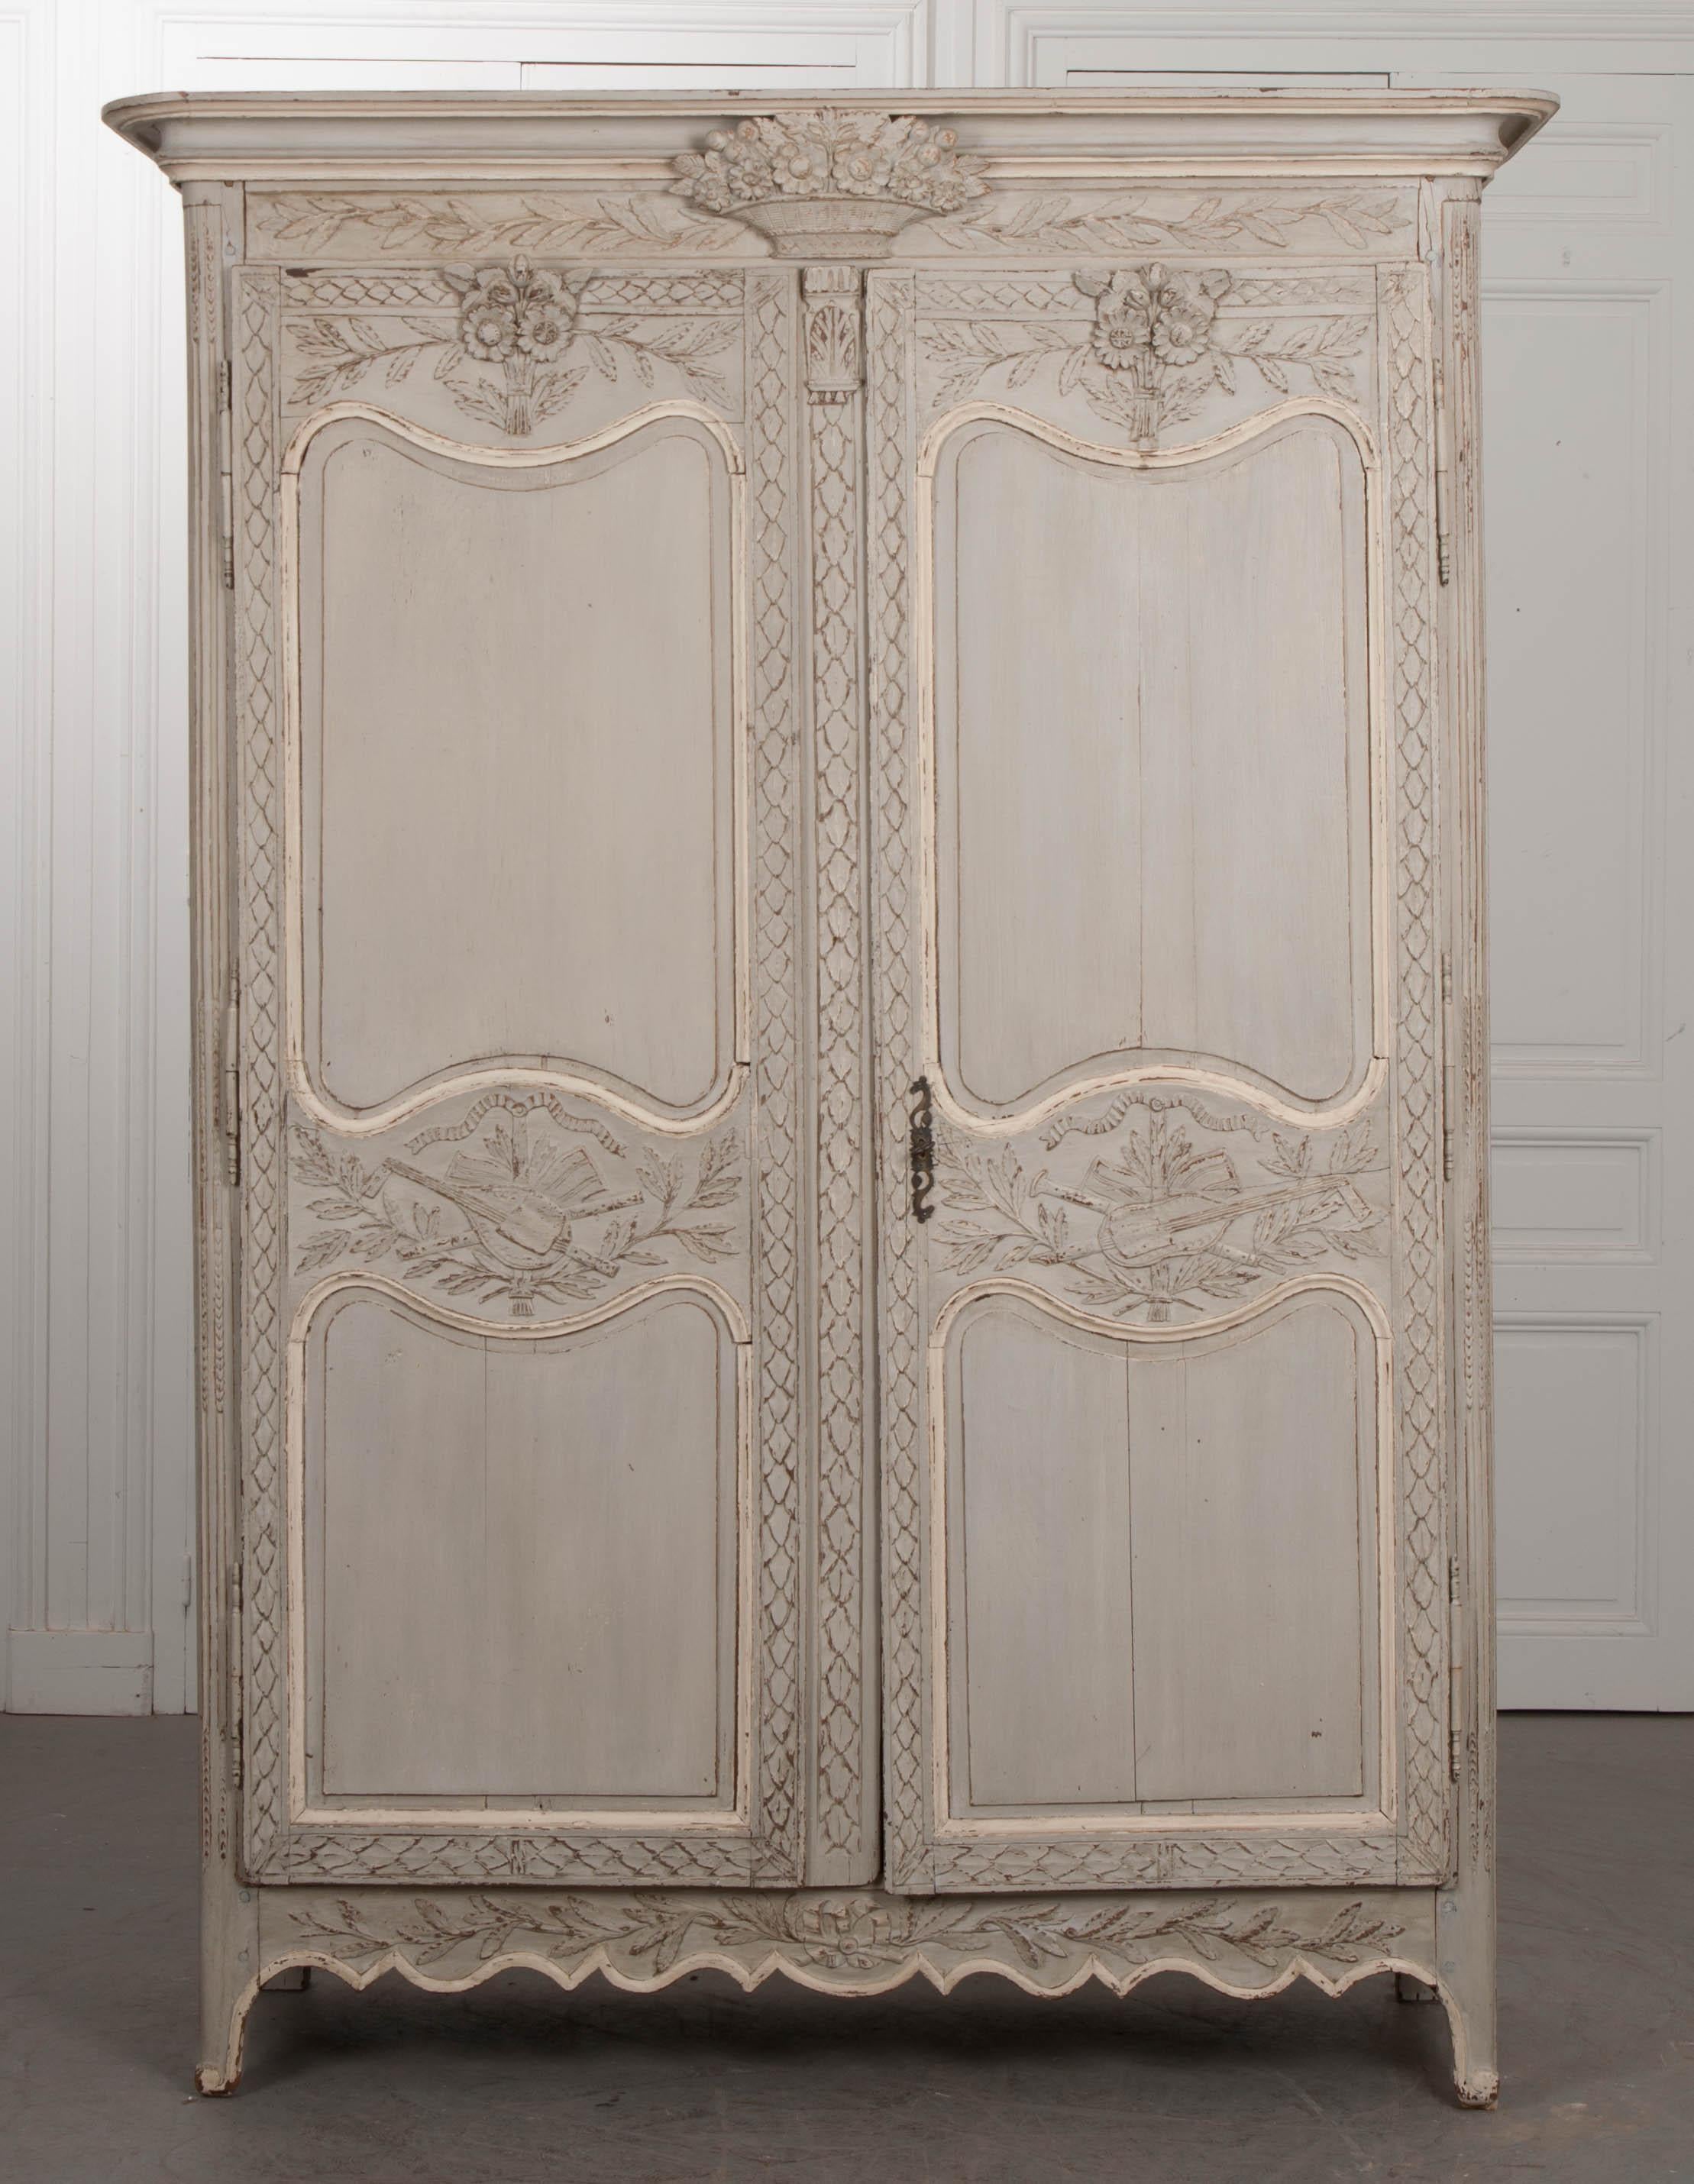 A French Louis XV to Louis XVI transitional dove-grey and ivory-painted oak marriage armoire, circa 1750. The cornice features an exuberantly carved wedding basket, flanked by foliage motifs along the rail. The doors, having two shaped and recessed